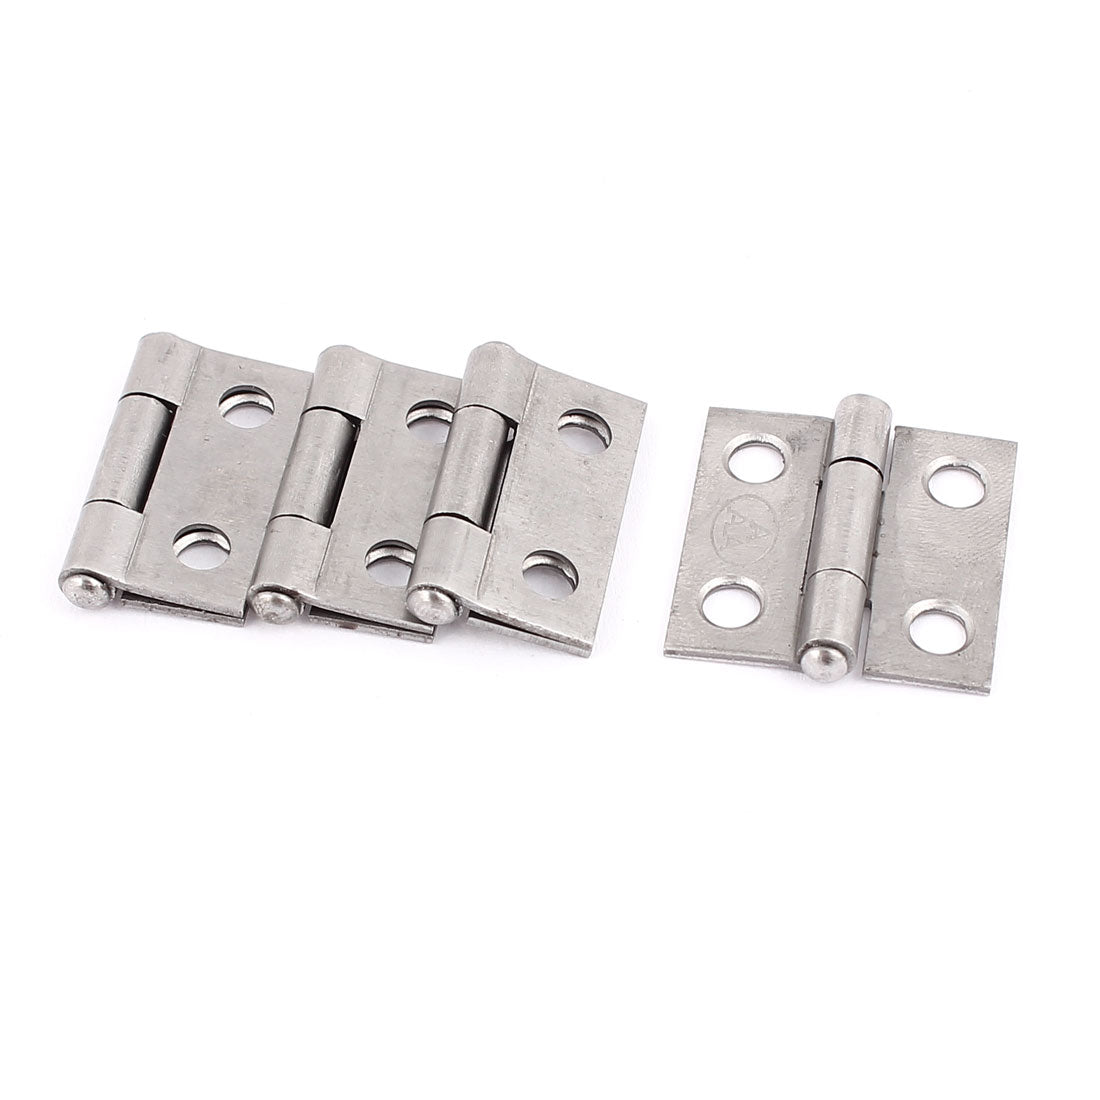 uxcell Uxcell 4 Pcs Gray Metal Rotatable Cabinet Door Hinges 25mmx25mm